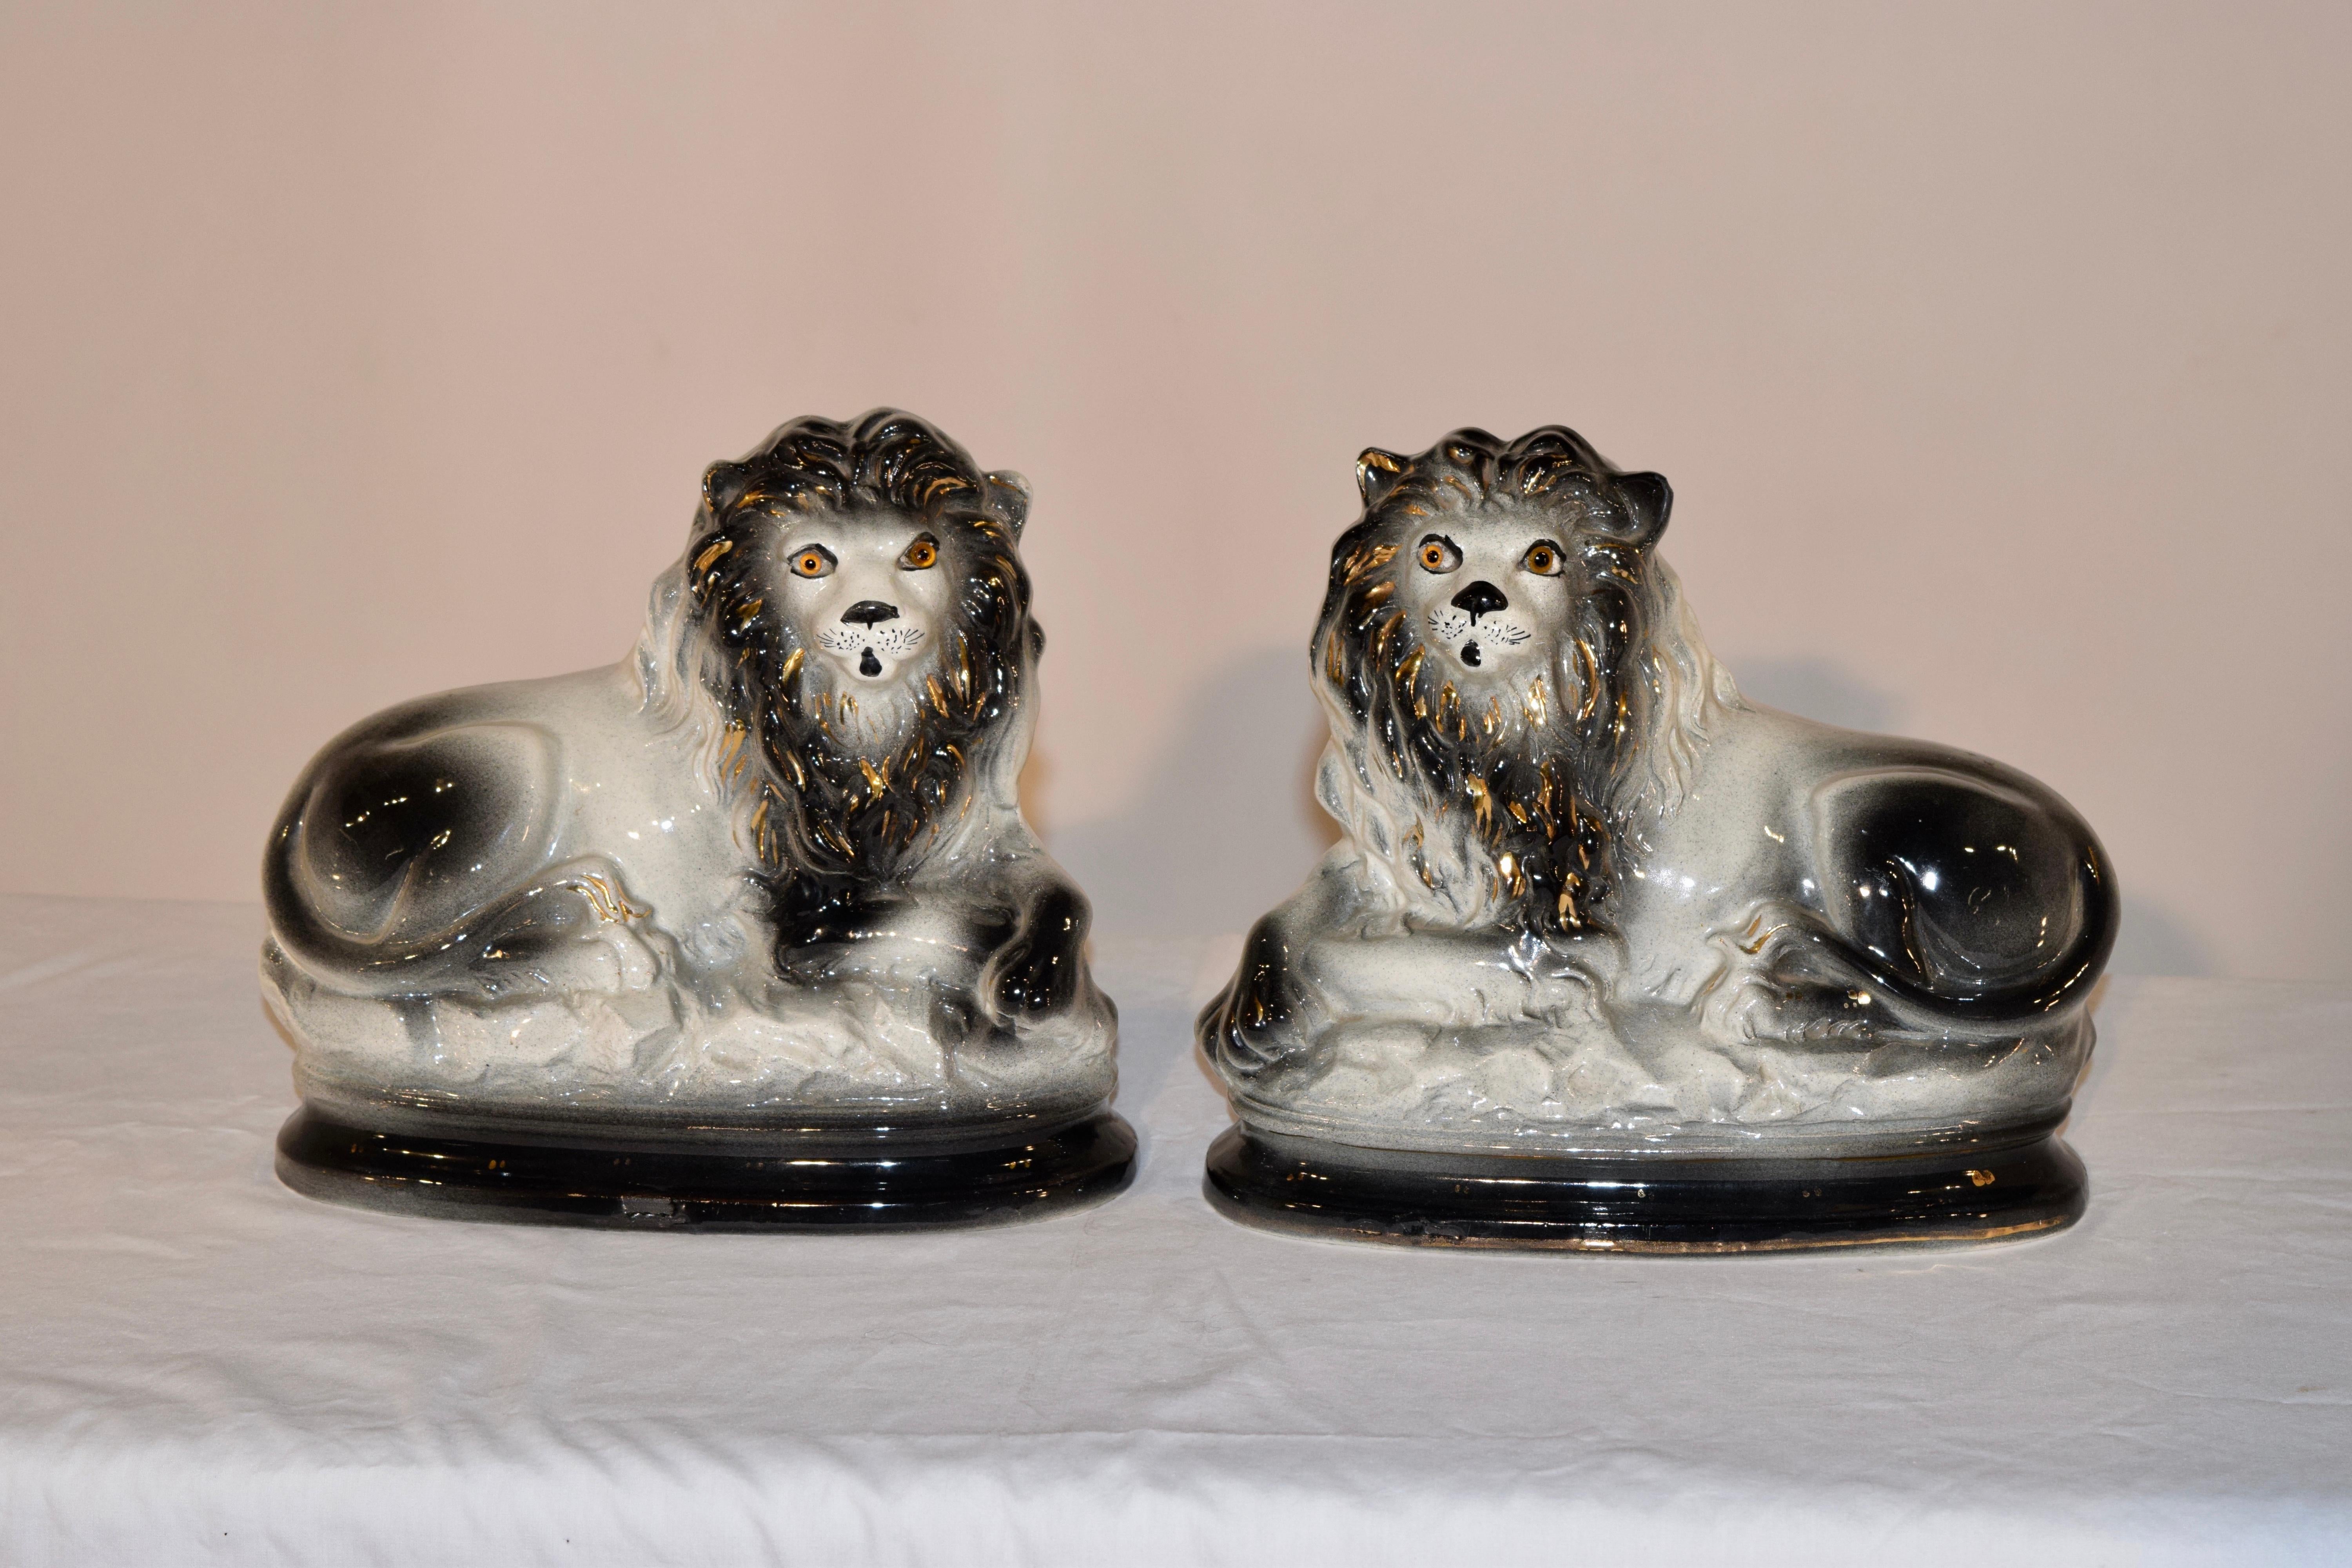 Late 19th century pair of English Staffordshire lions in an unusual black and white coloration with gilt decoration and glass eyes.